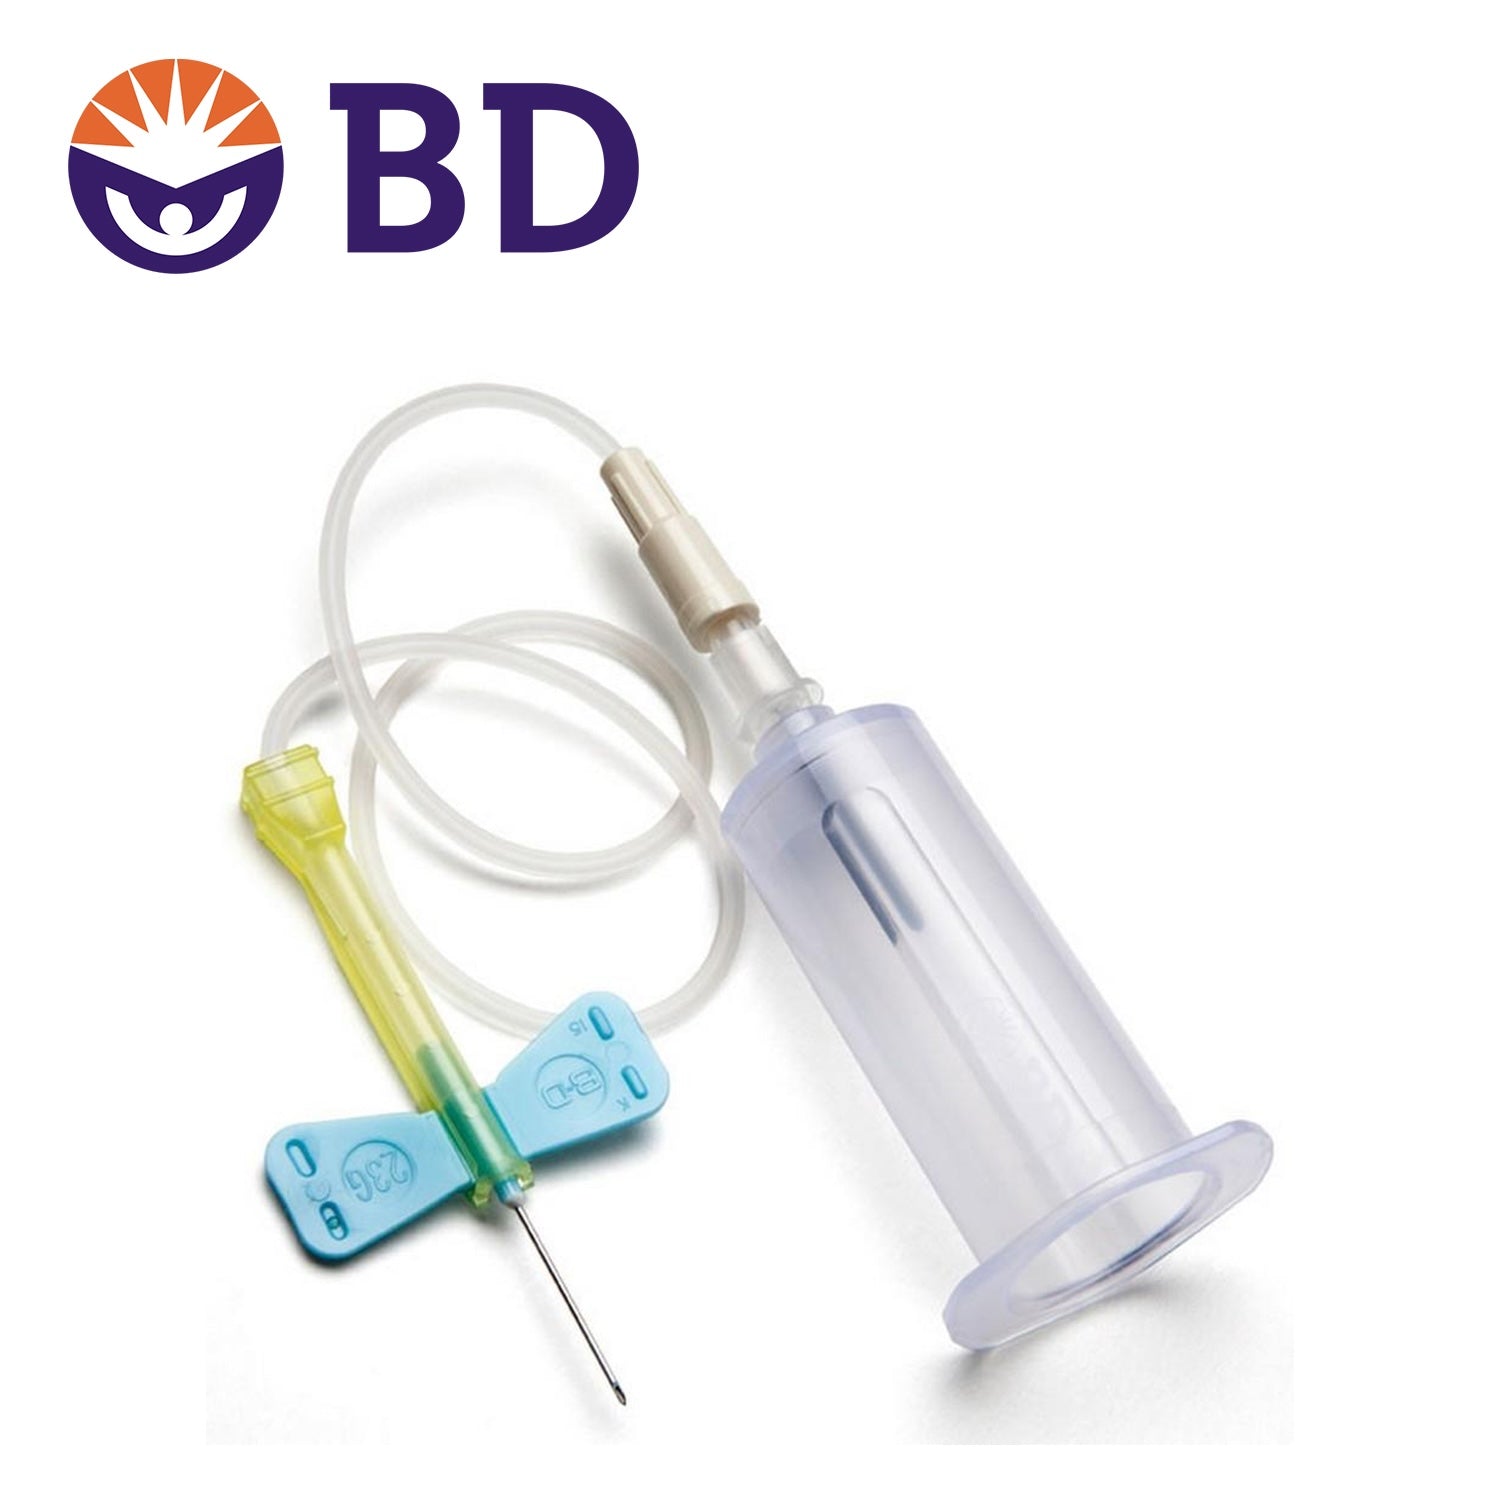 BD Vacutainer Safety Lok Blood Collection System with Pre-attached Holder | 0.75" Needle | 23G x 7" Tubing | Pack of 25